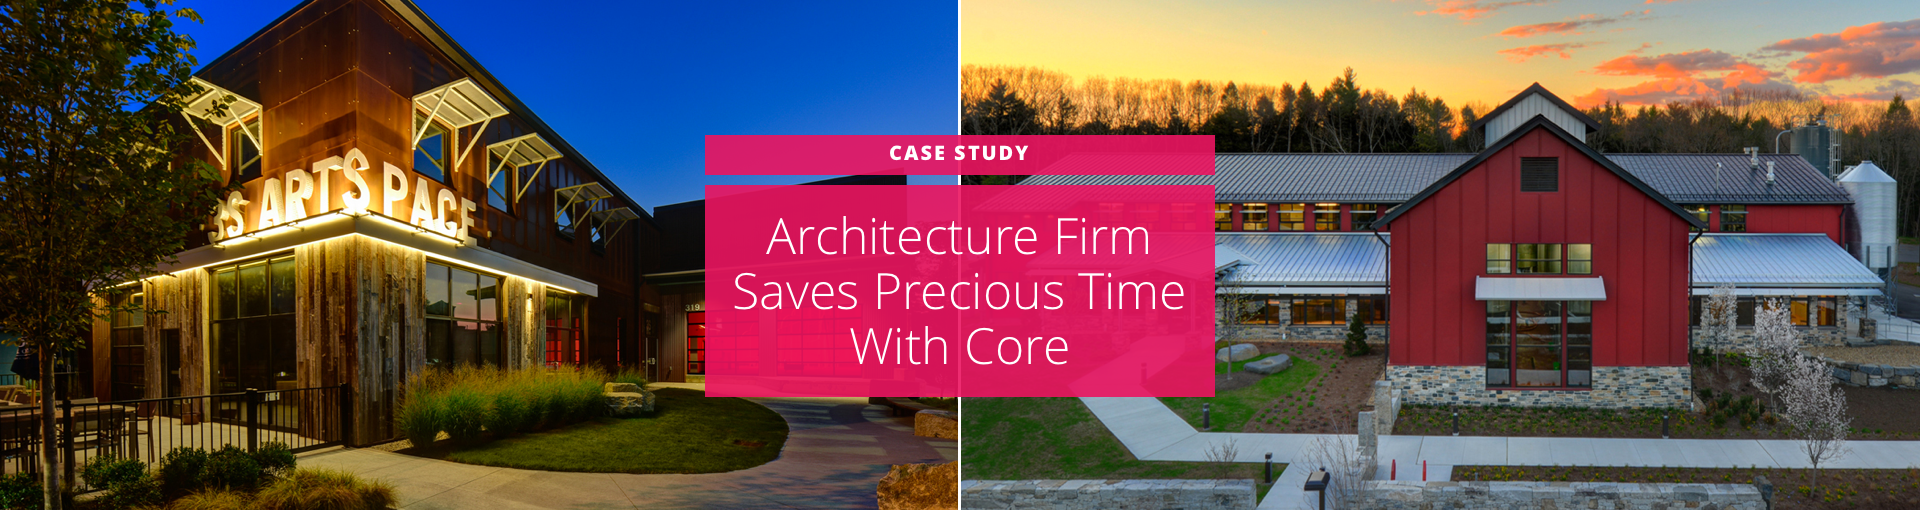 Case Study: Architecture Firm Saves Precious Time With CORE Featured Image